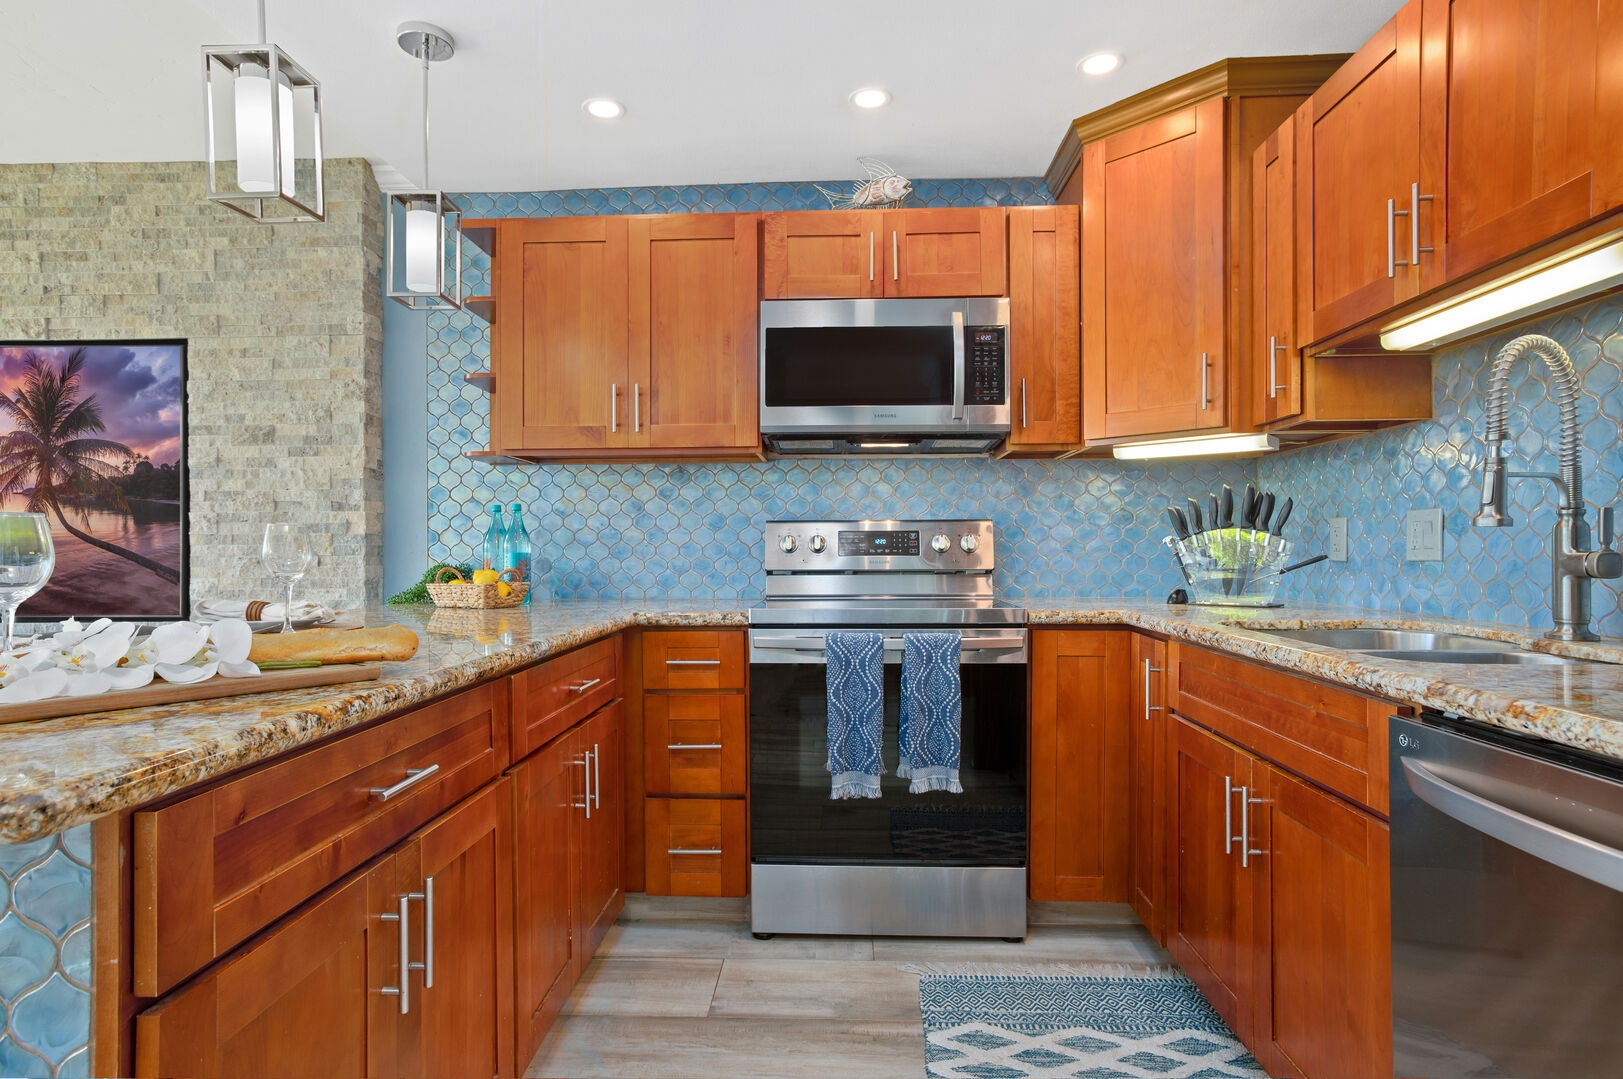 The condo has a fully-equipped kitchen perfect for your culinary needs!